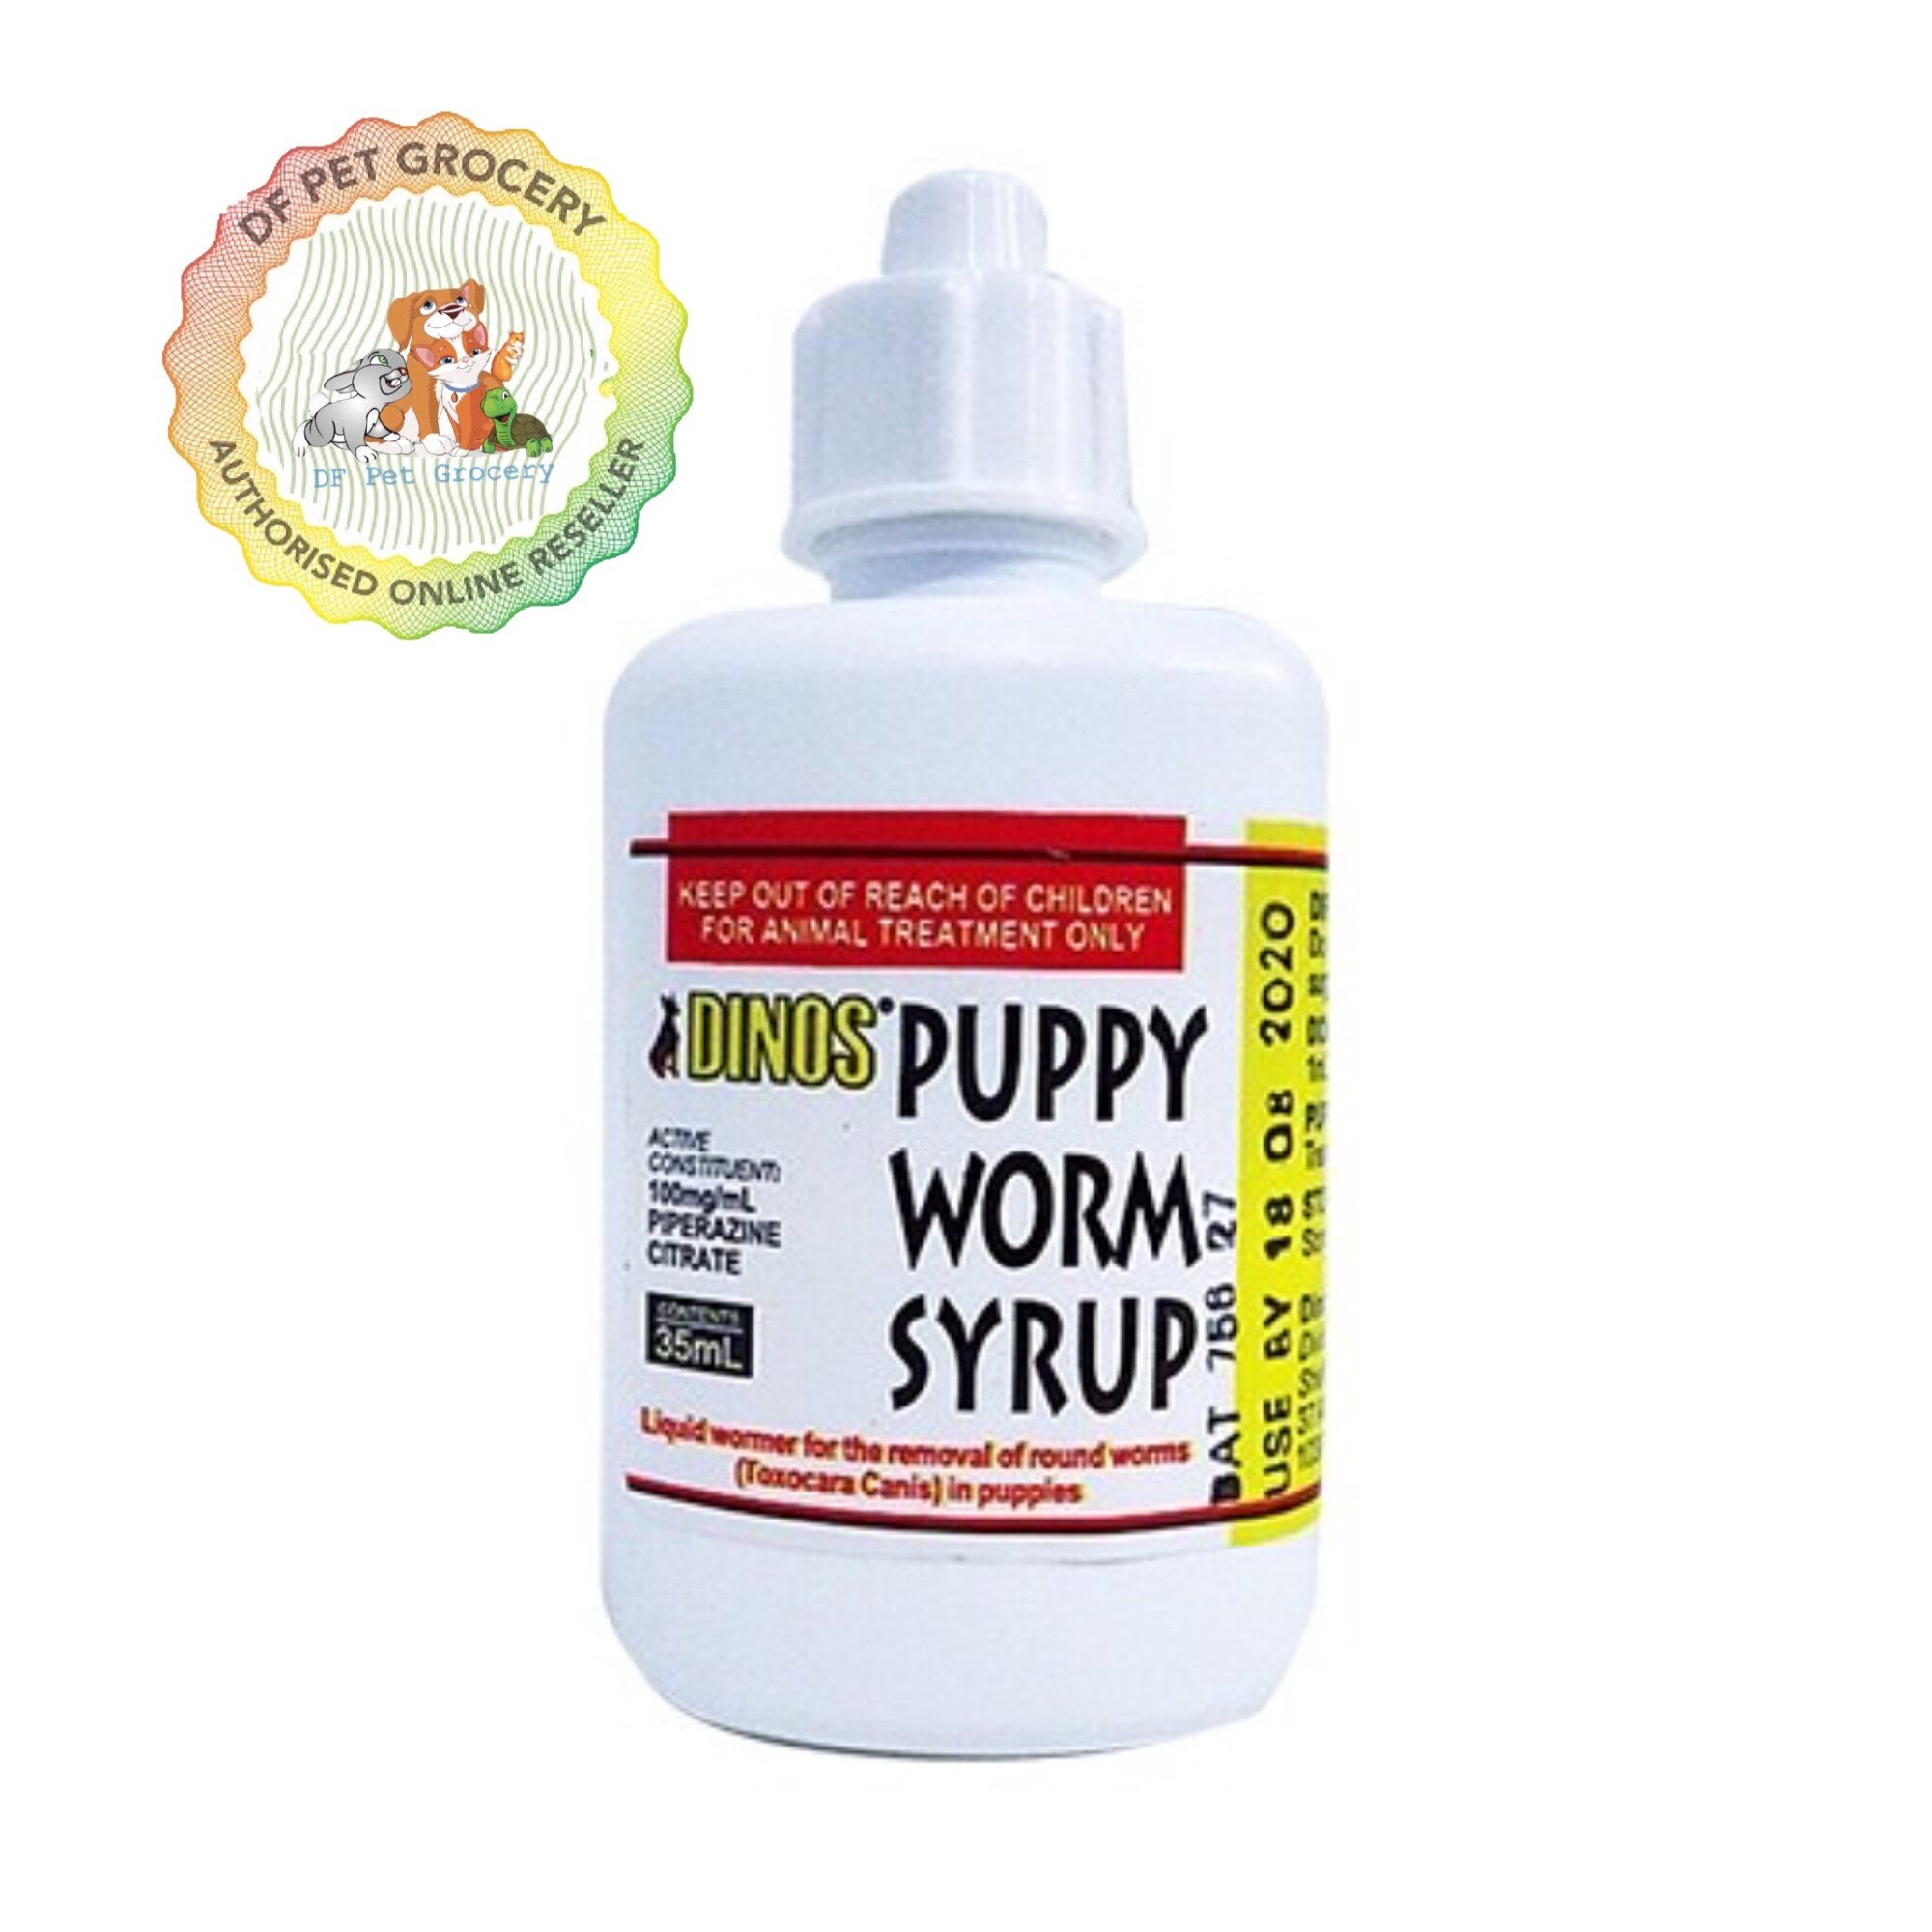 Dinos Puppy &amp; Adult Wormer Syrup 35ml ( Deworm For Dog )